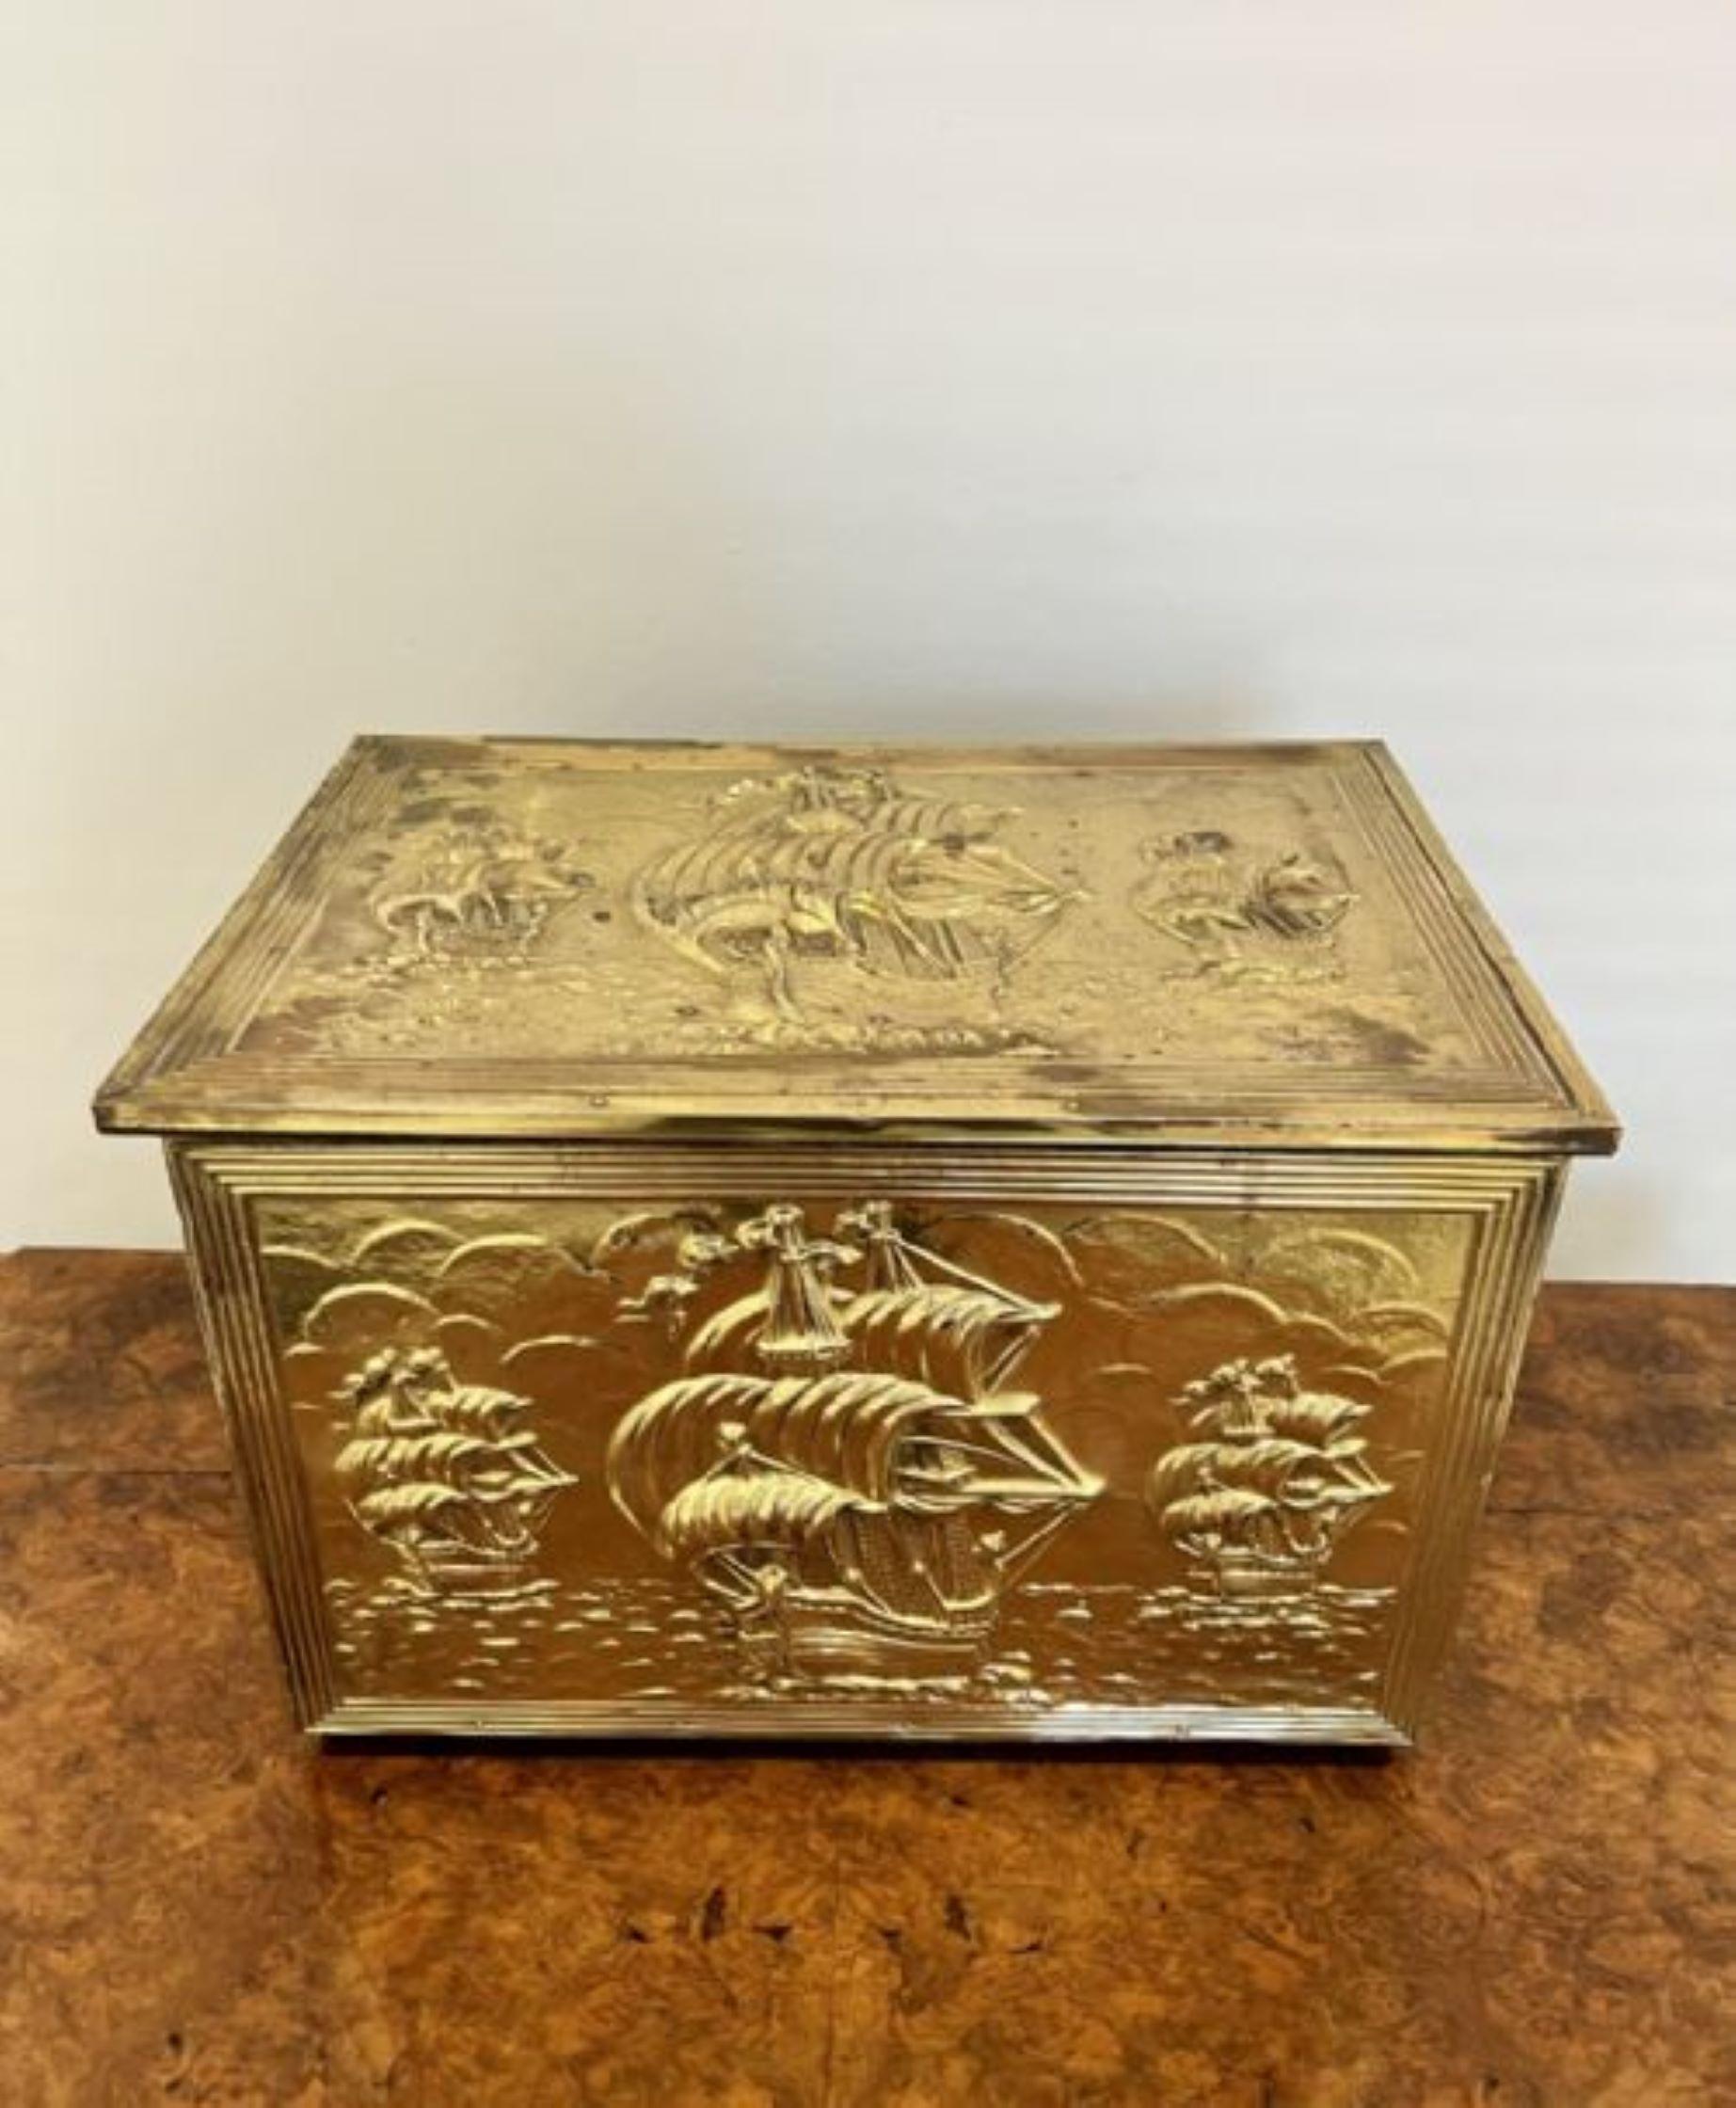 Ornate antique quality brass coal box having a quality ornate brass lift up lid with ships and sea opening to reveal a storage compartment for coal with ornate front and sides. 